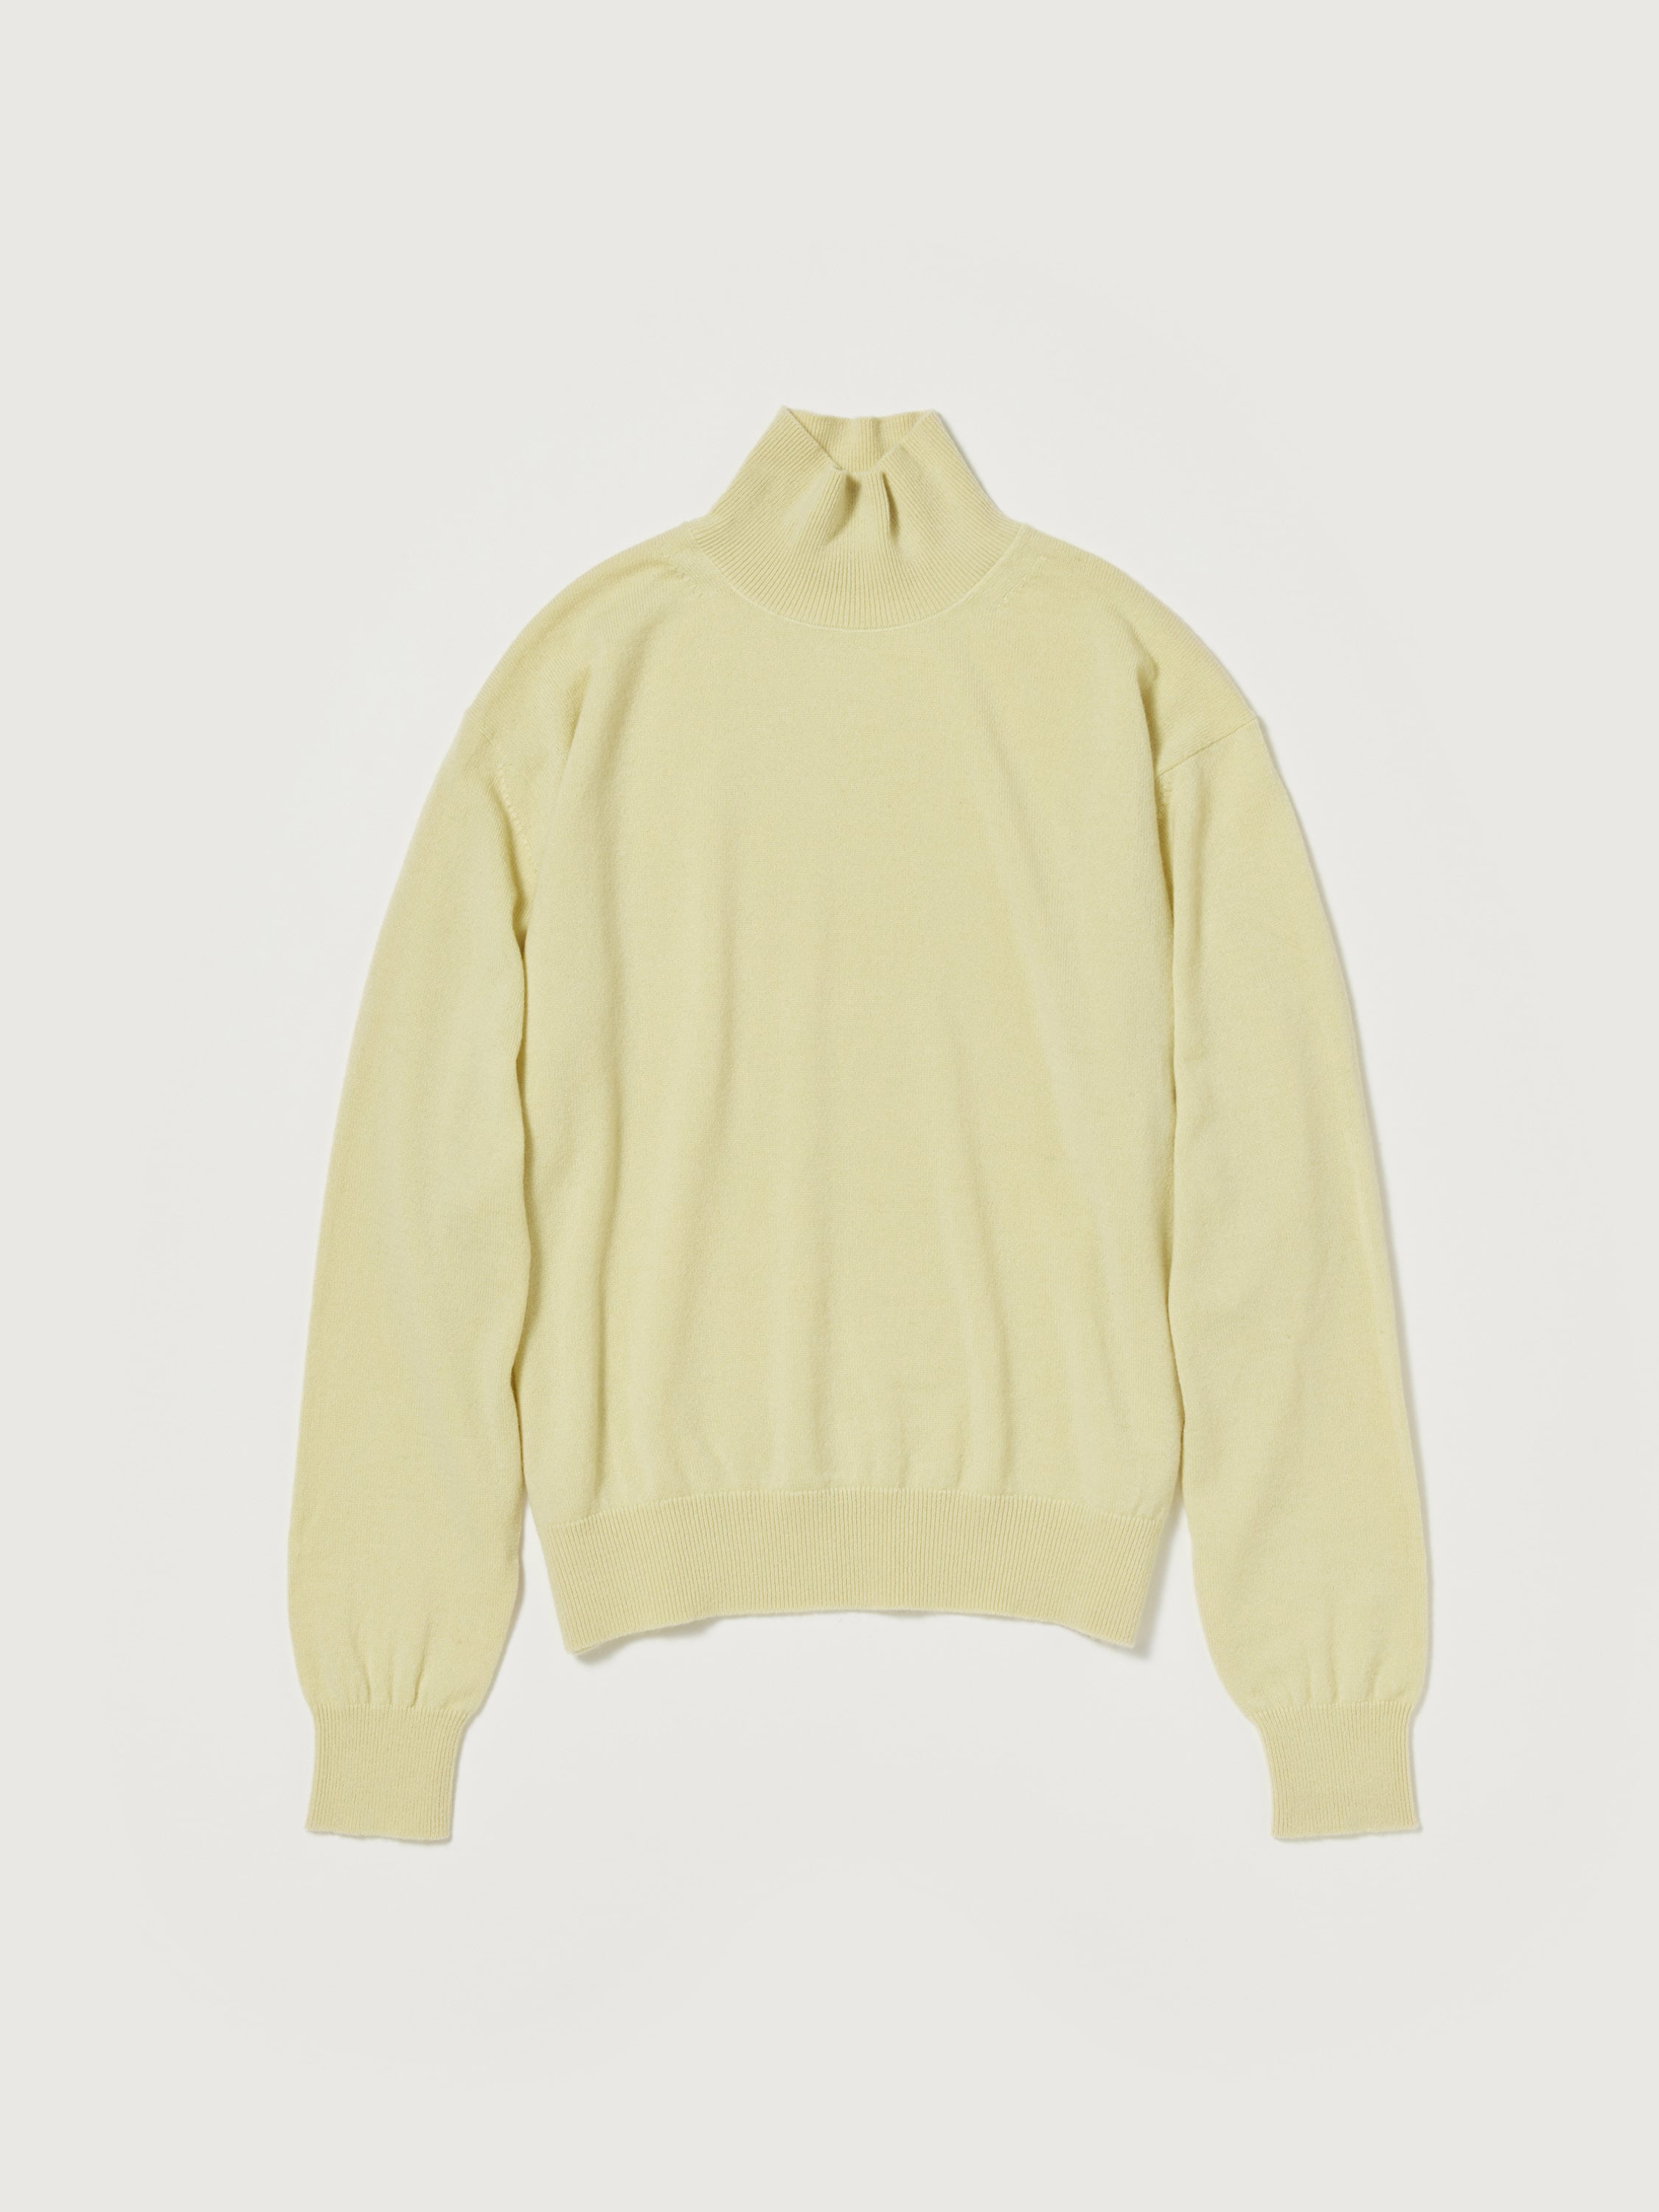 BABY CASHMERE KNIT TURTLE 詳細画像 TOP LIGHT YELLOW 1